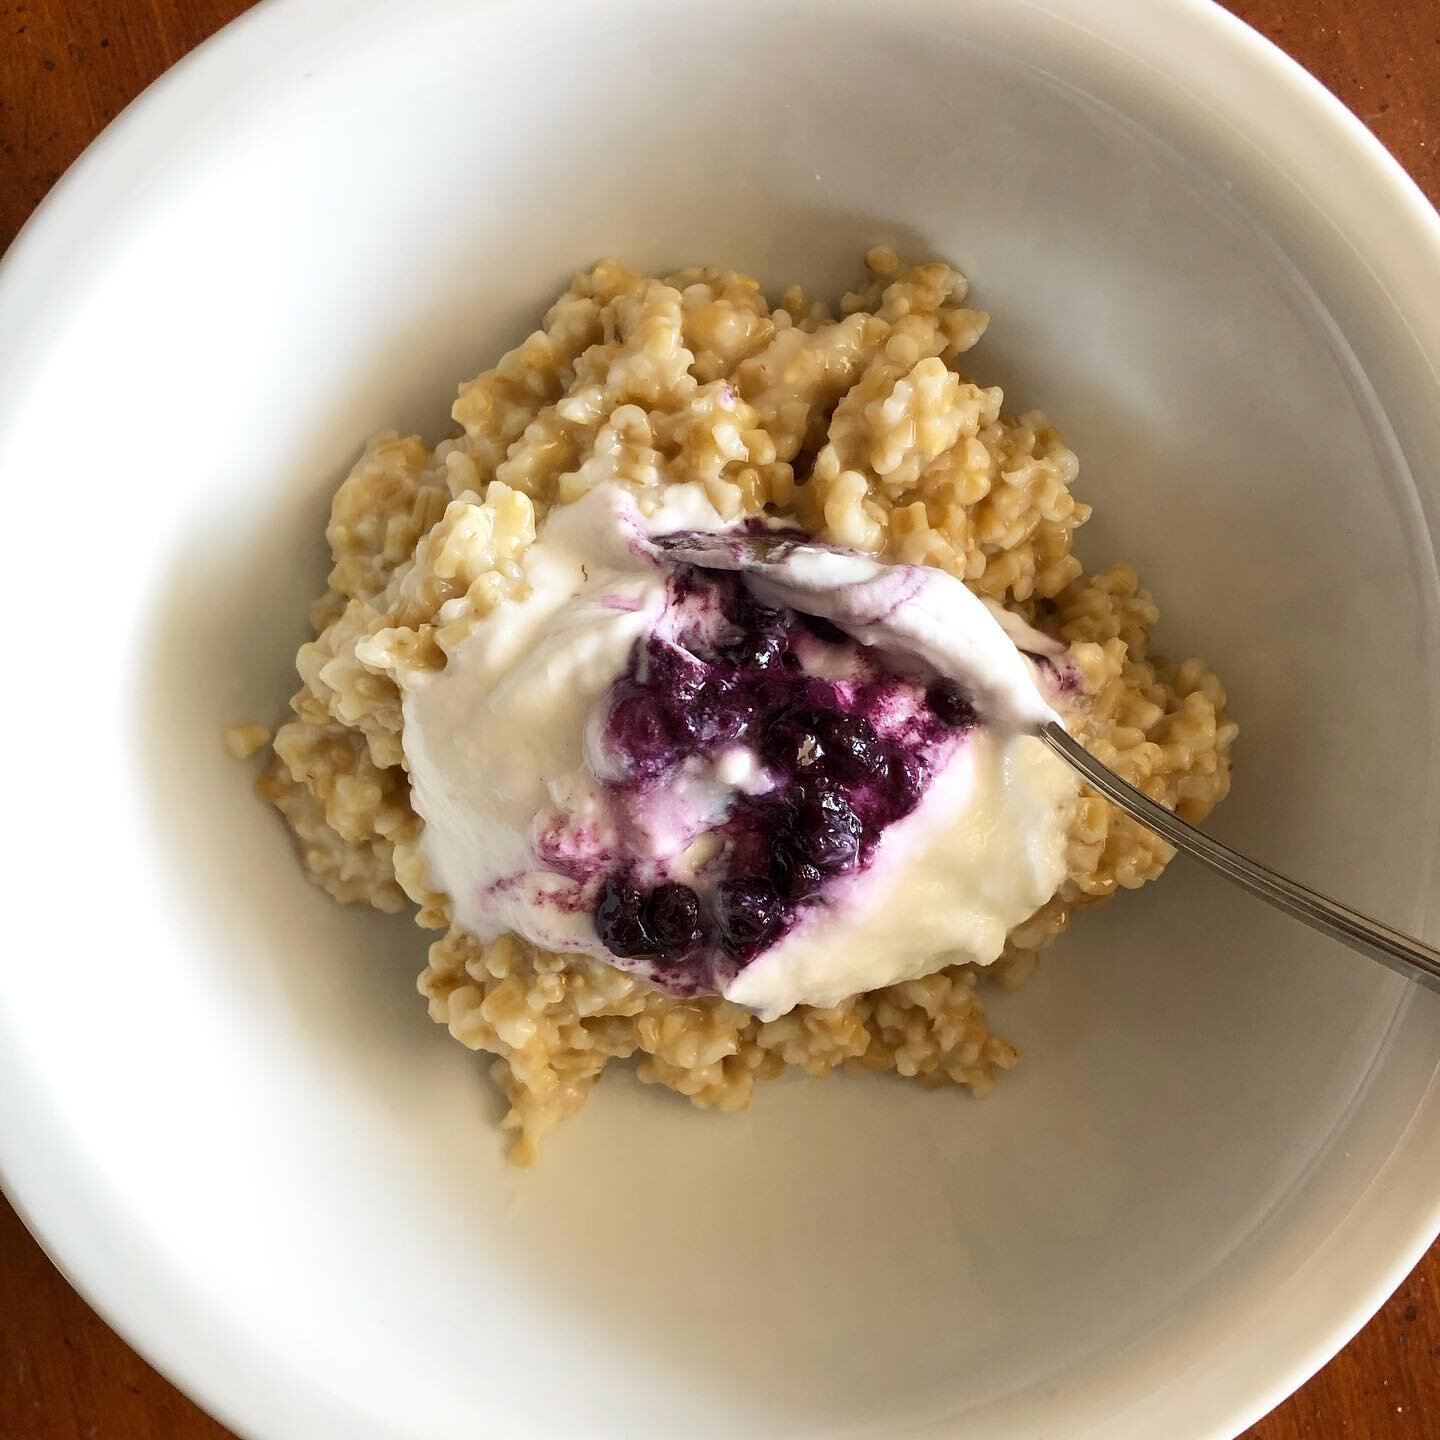 Privileged to have a paycheck and be able to WFH, with special thanks to @riverineranch @grownyc 

#wfhtips #oatmeal #blueberryyogurt #farmersmarketsareessential #mondaymindset